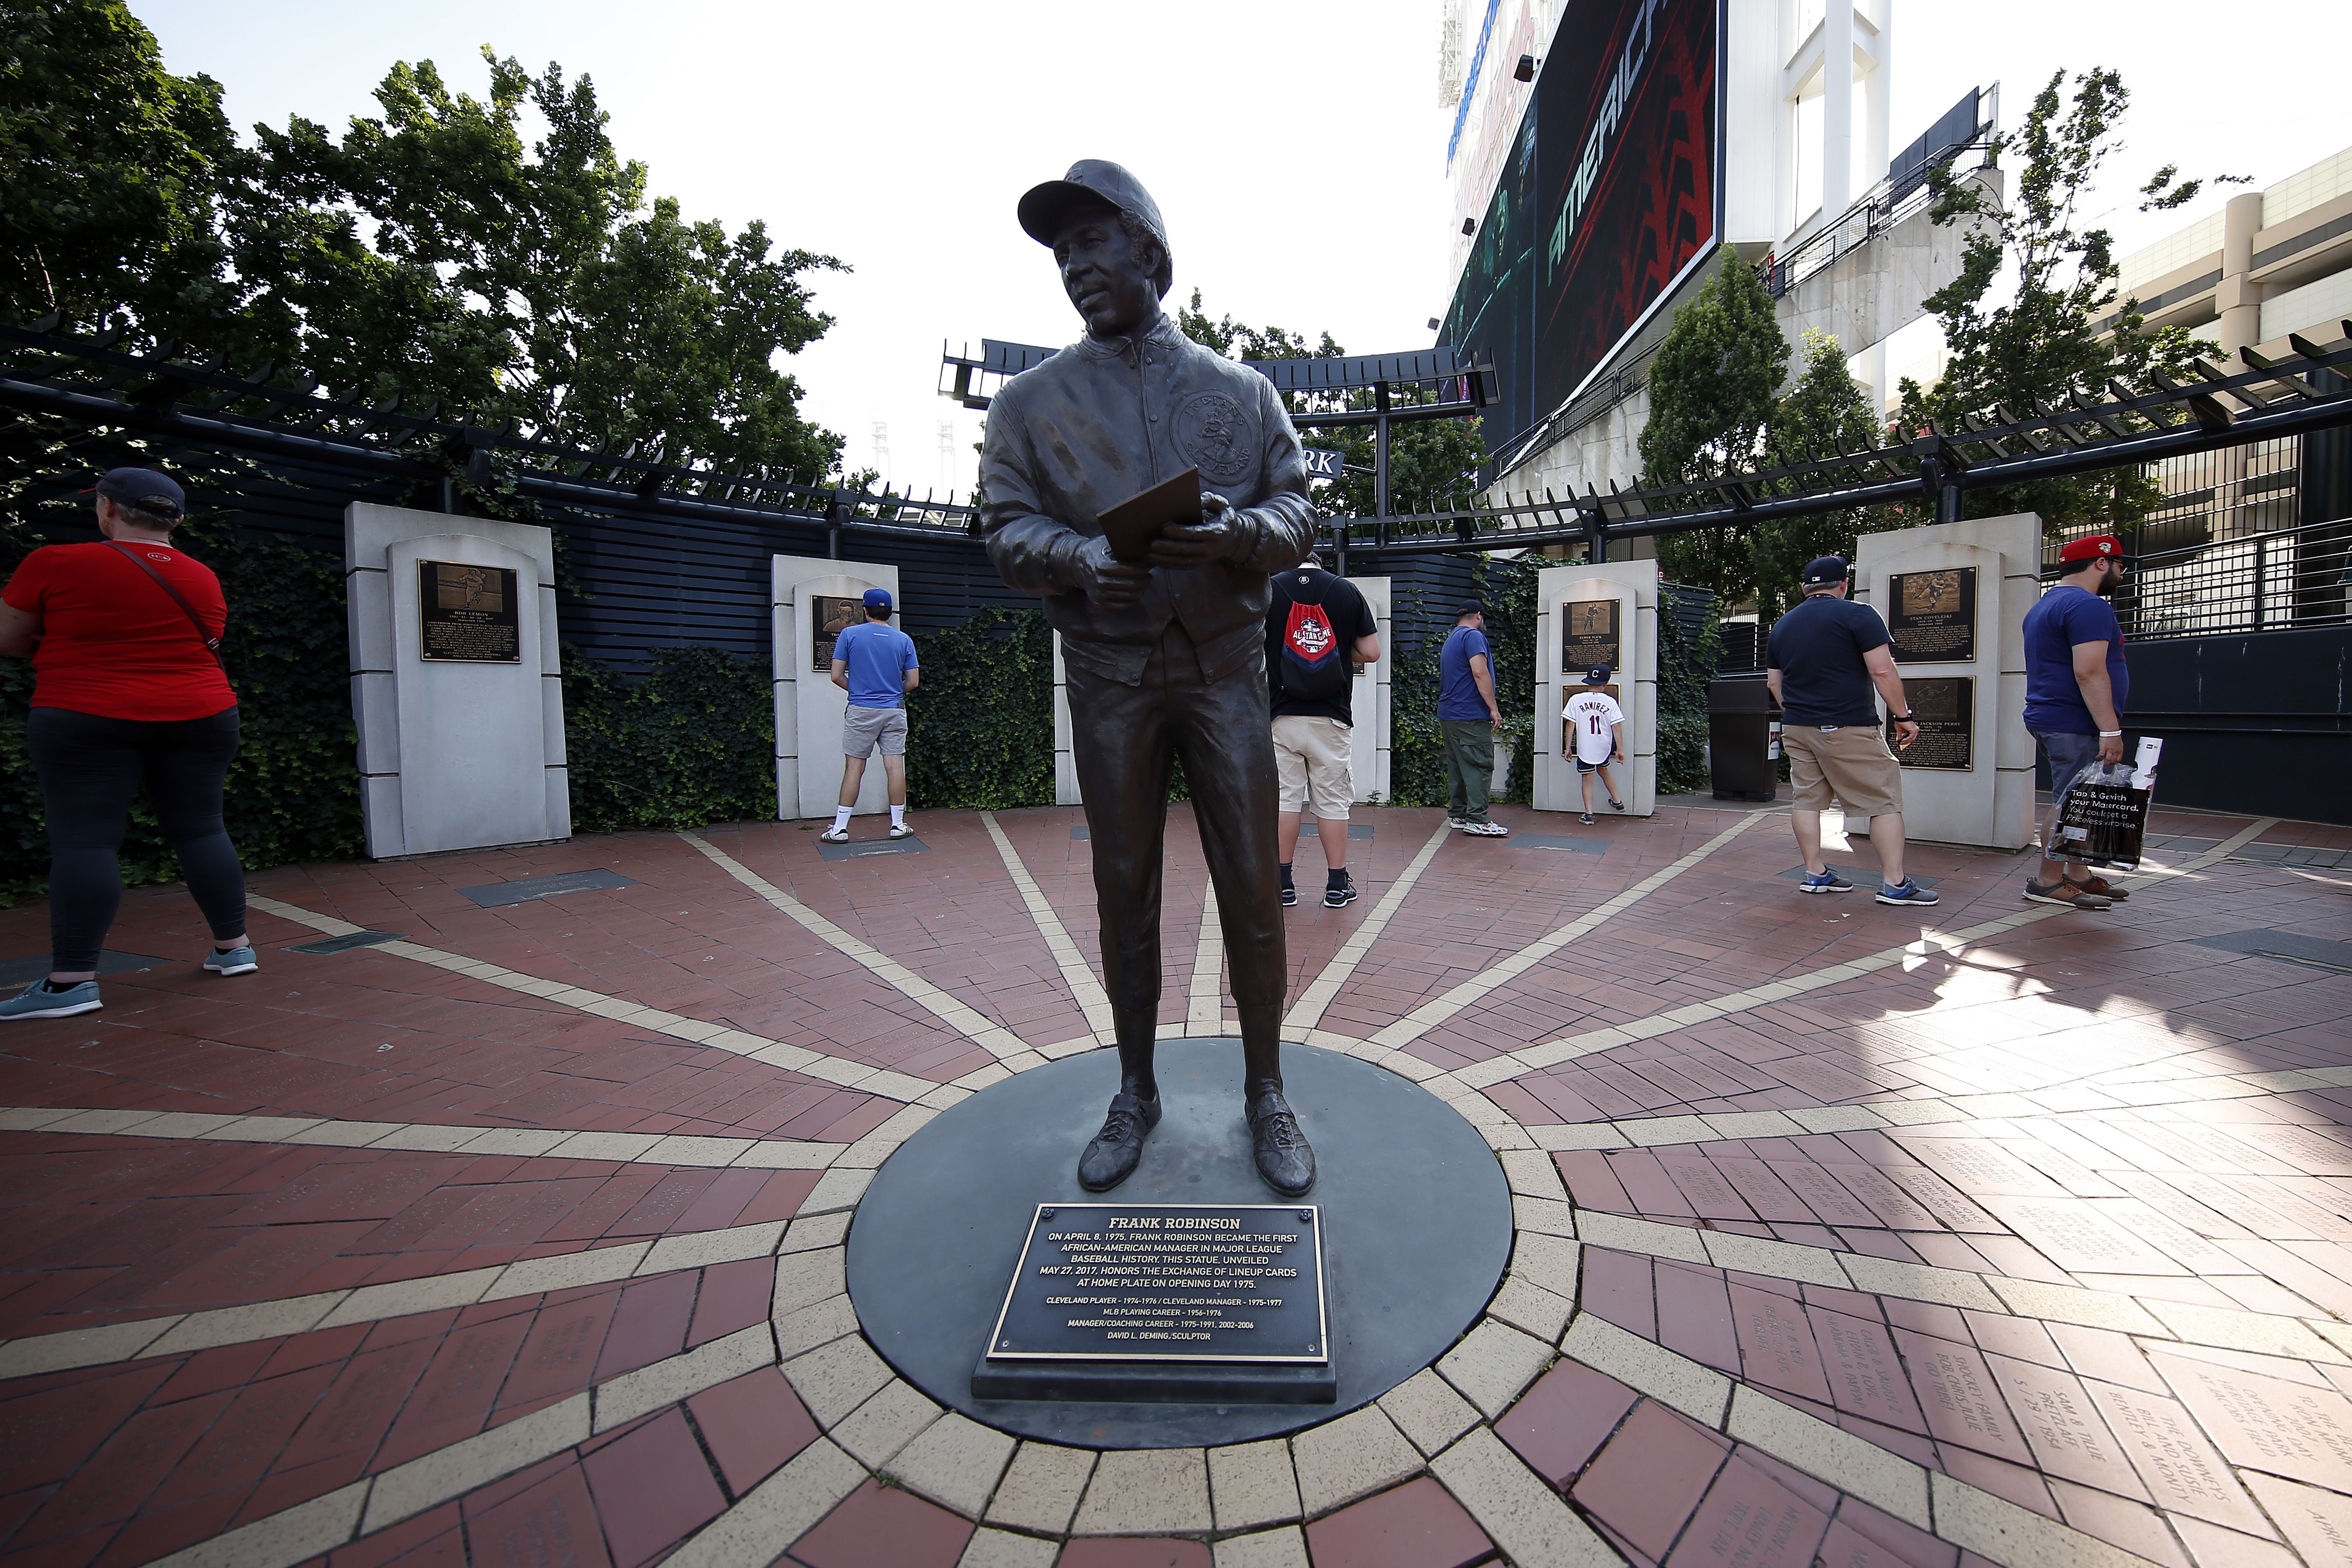 In this image, a statue of Frank Robinson is seen 